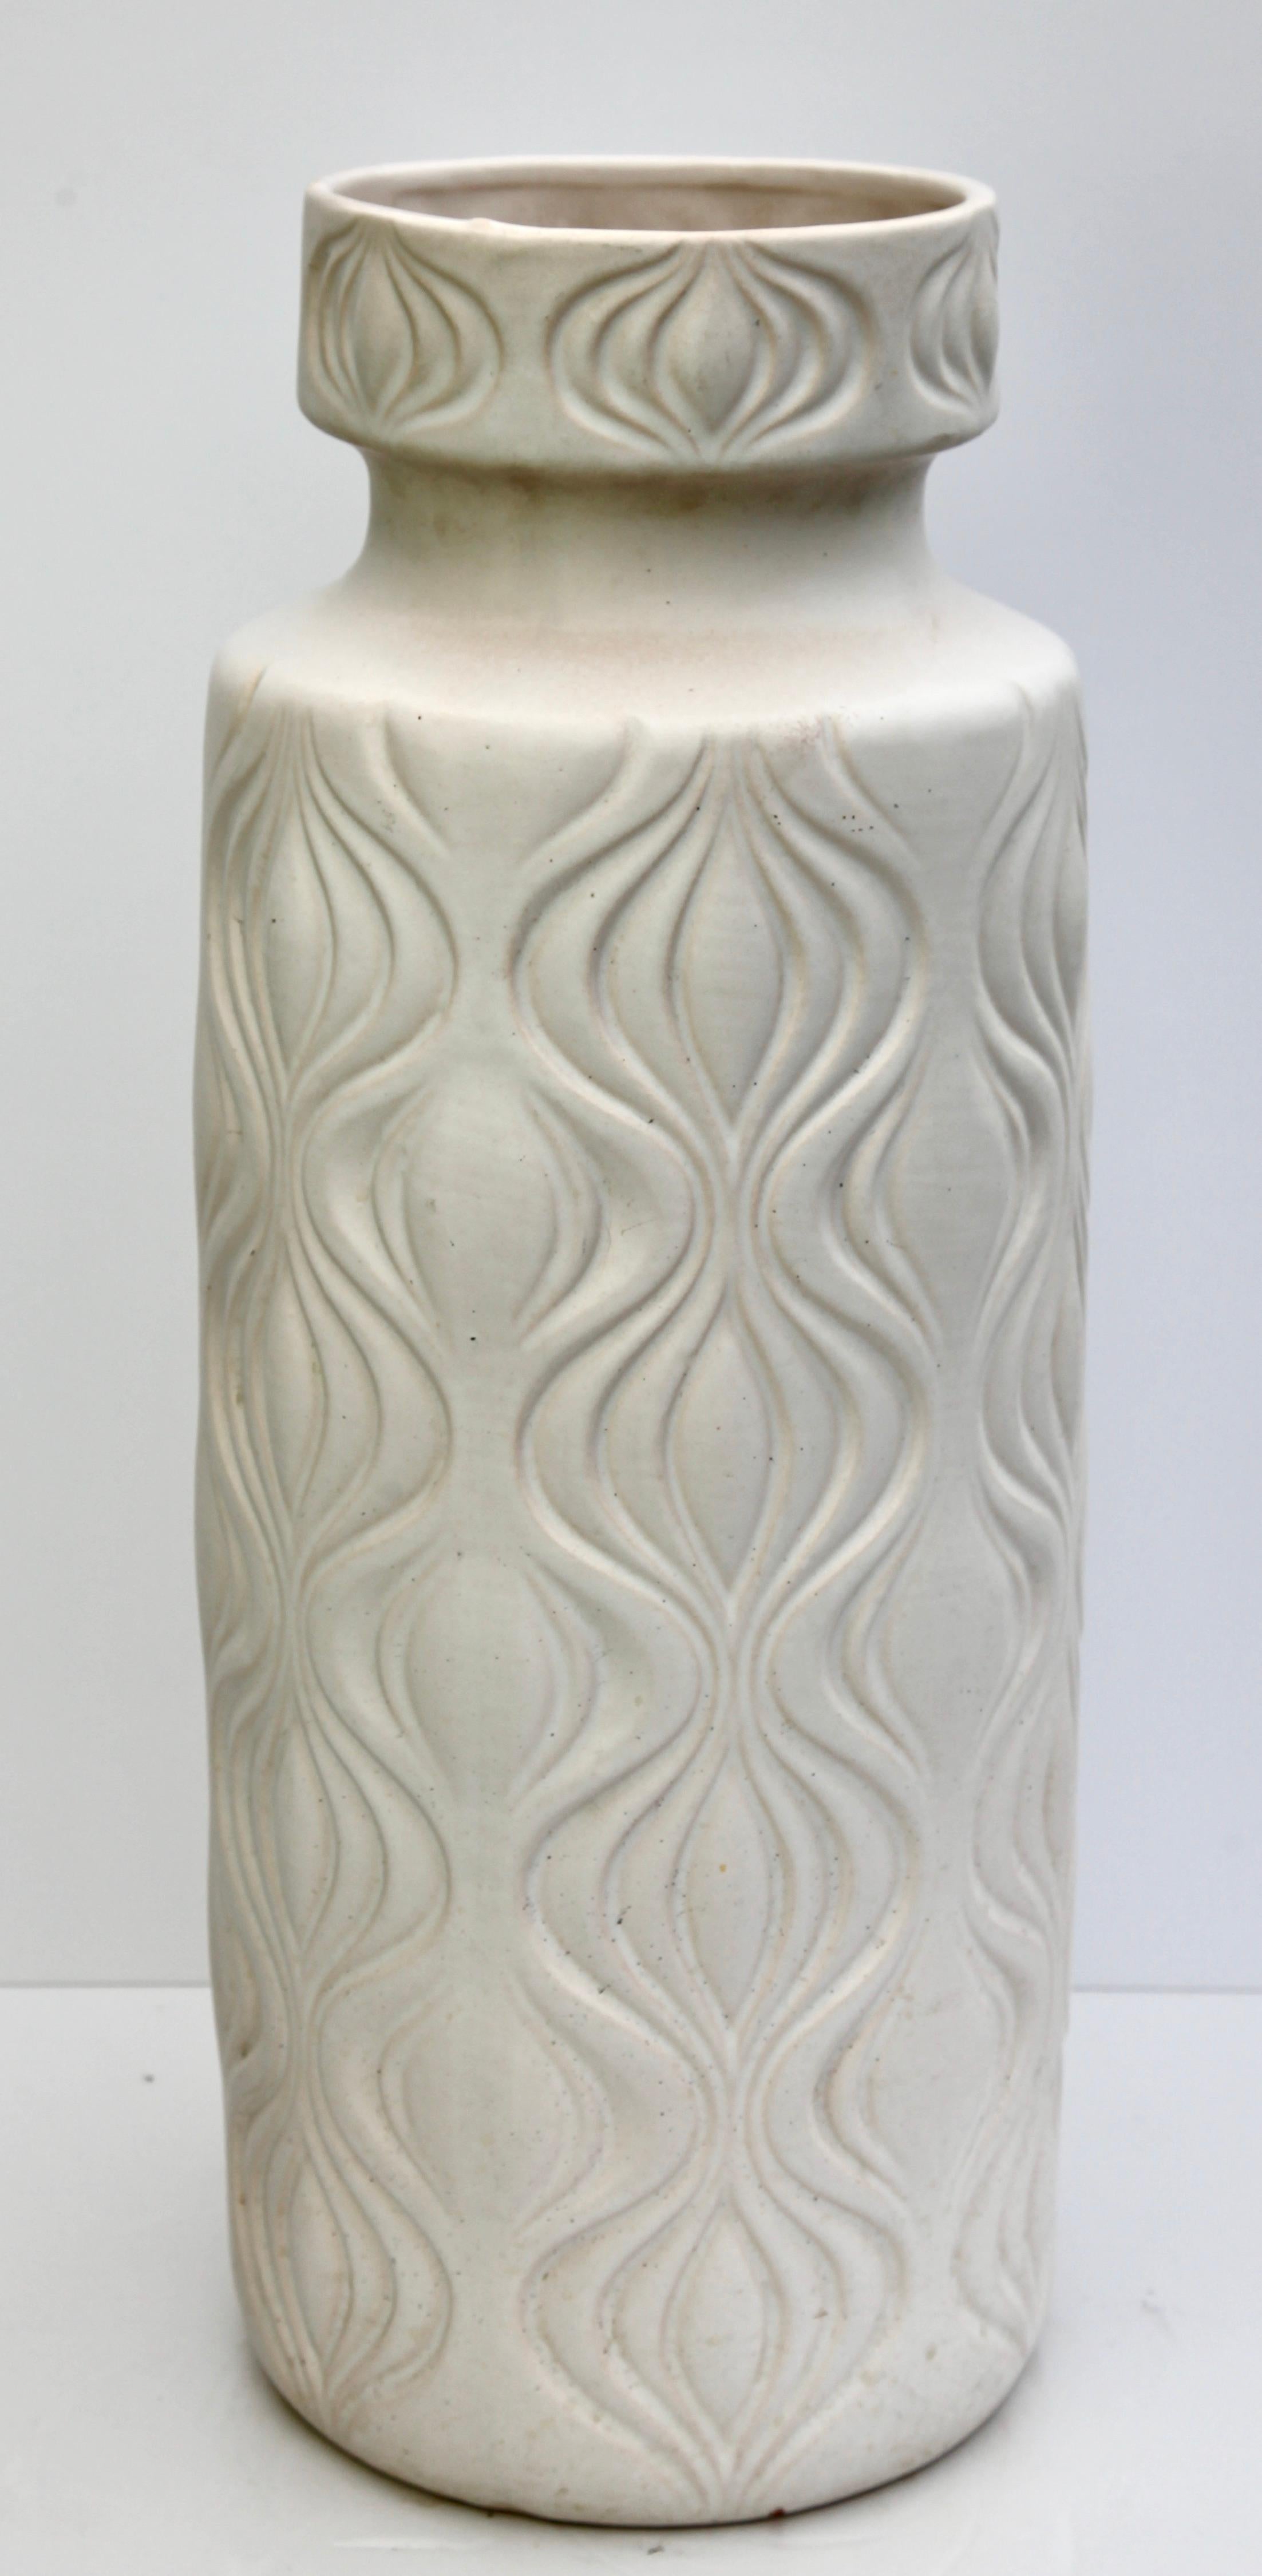 Scheurich floor vase, in white satin finish ('half gloss') W-Germany , 1960s.
with impressed design 'Amsterdam', inspired by the central canal systems of the Dutch capital as reflected in the water of its canals.

Stamped on base. (hard to verify